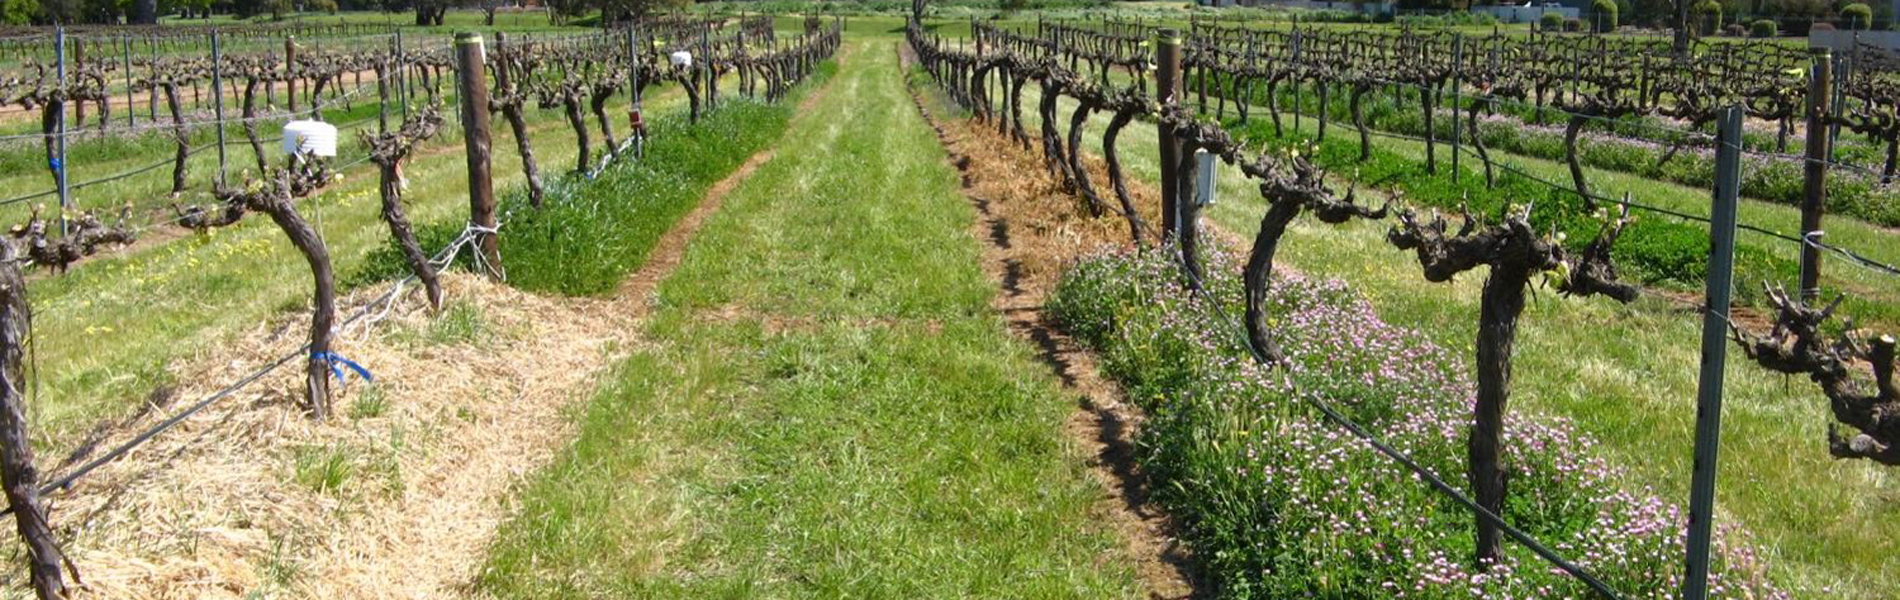 A row of vines in a vineyard with green under vine management equipment.